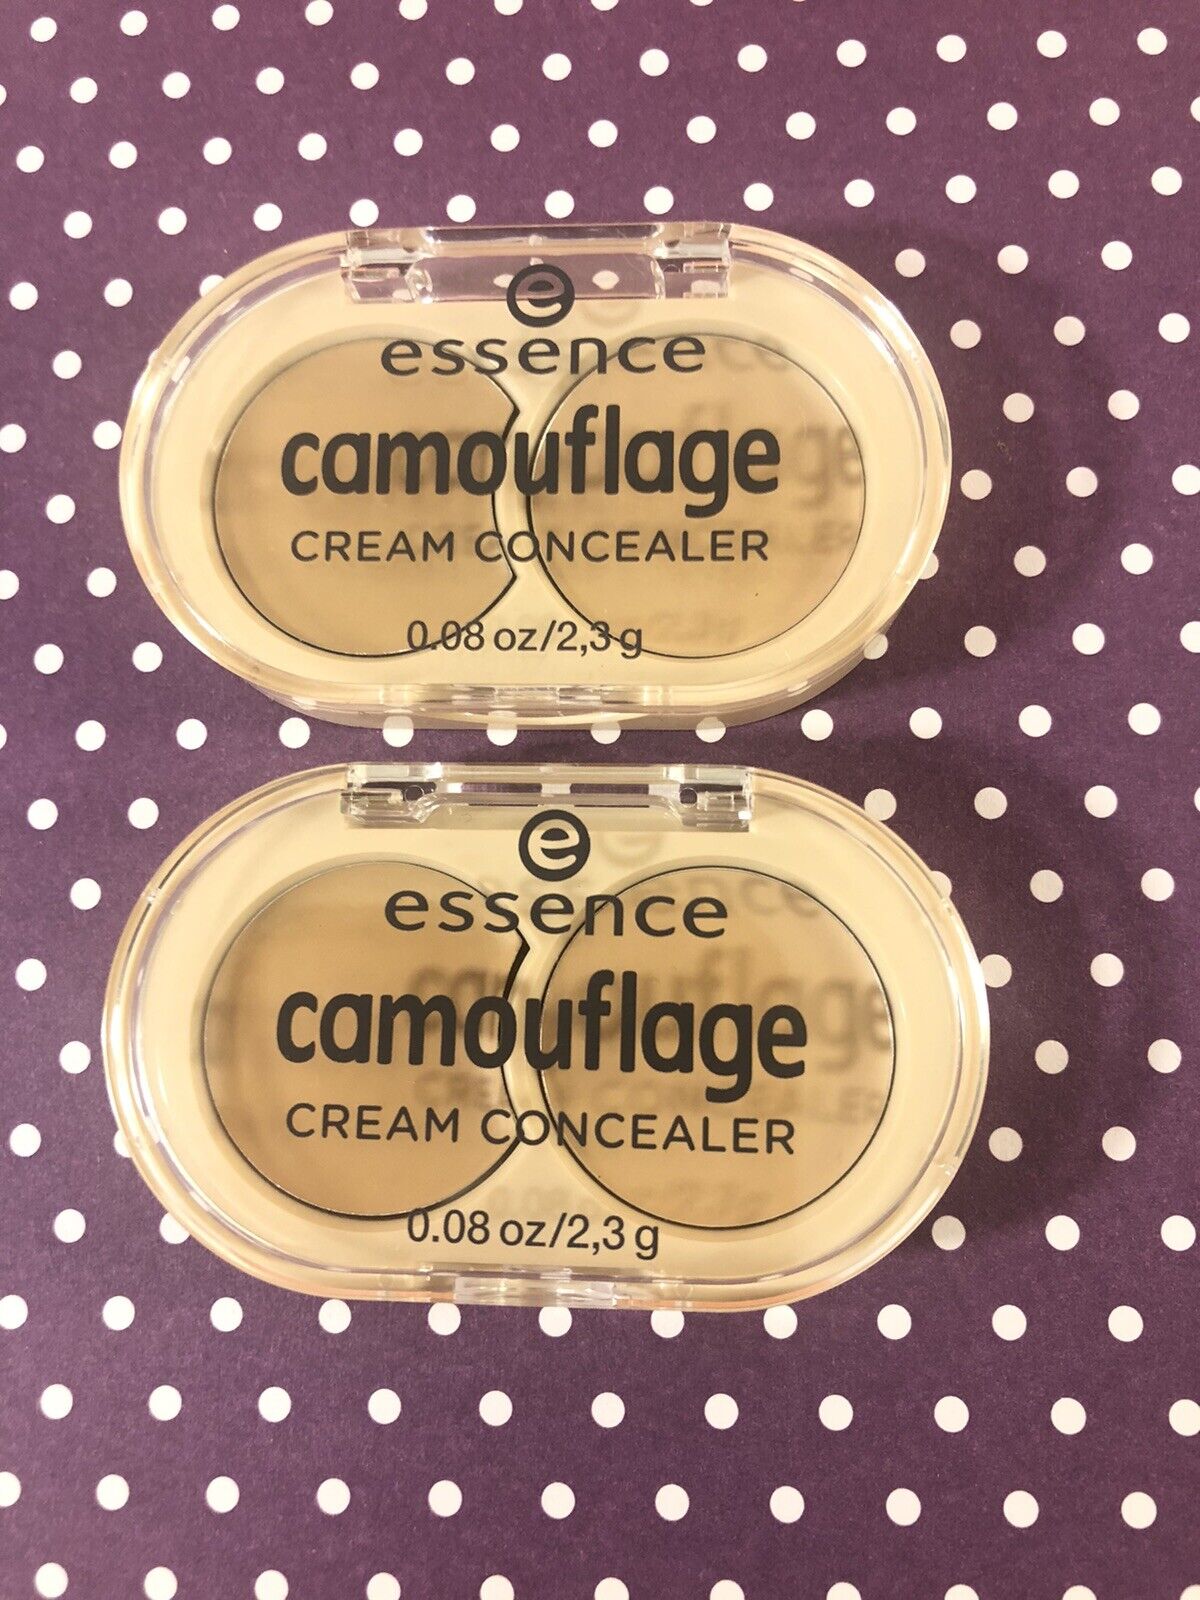 Essence Camouflage Cream Concealer Very High Coverage Natural Beige #10 Lot Of 2